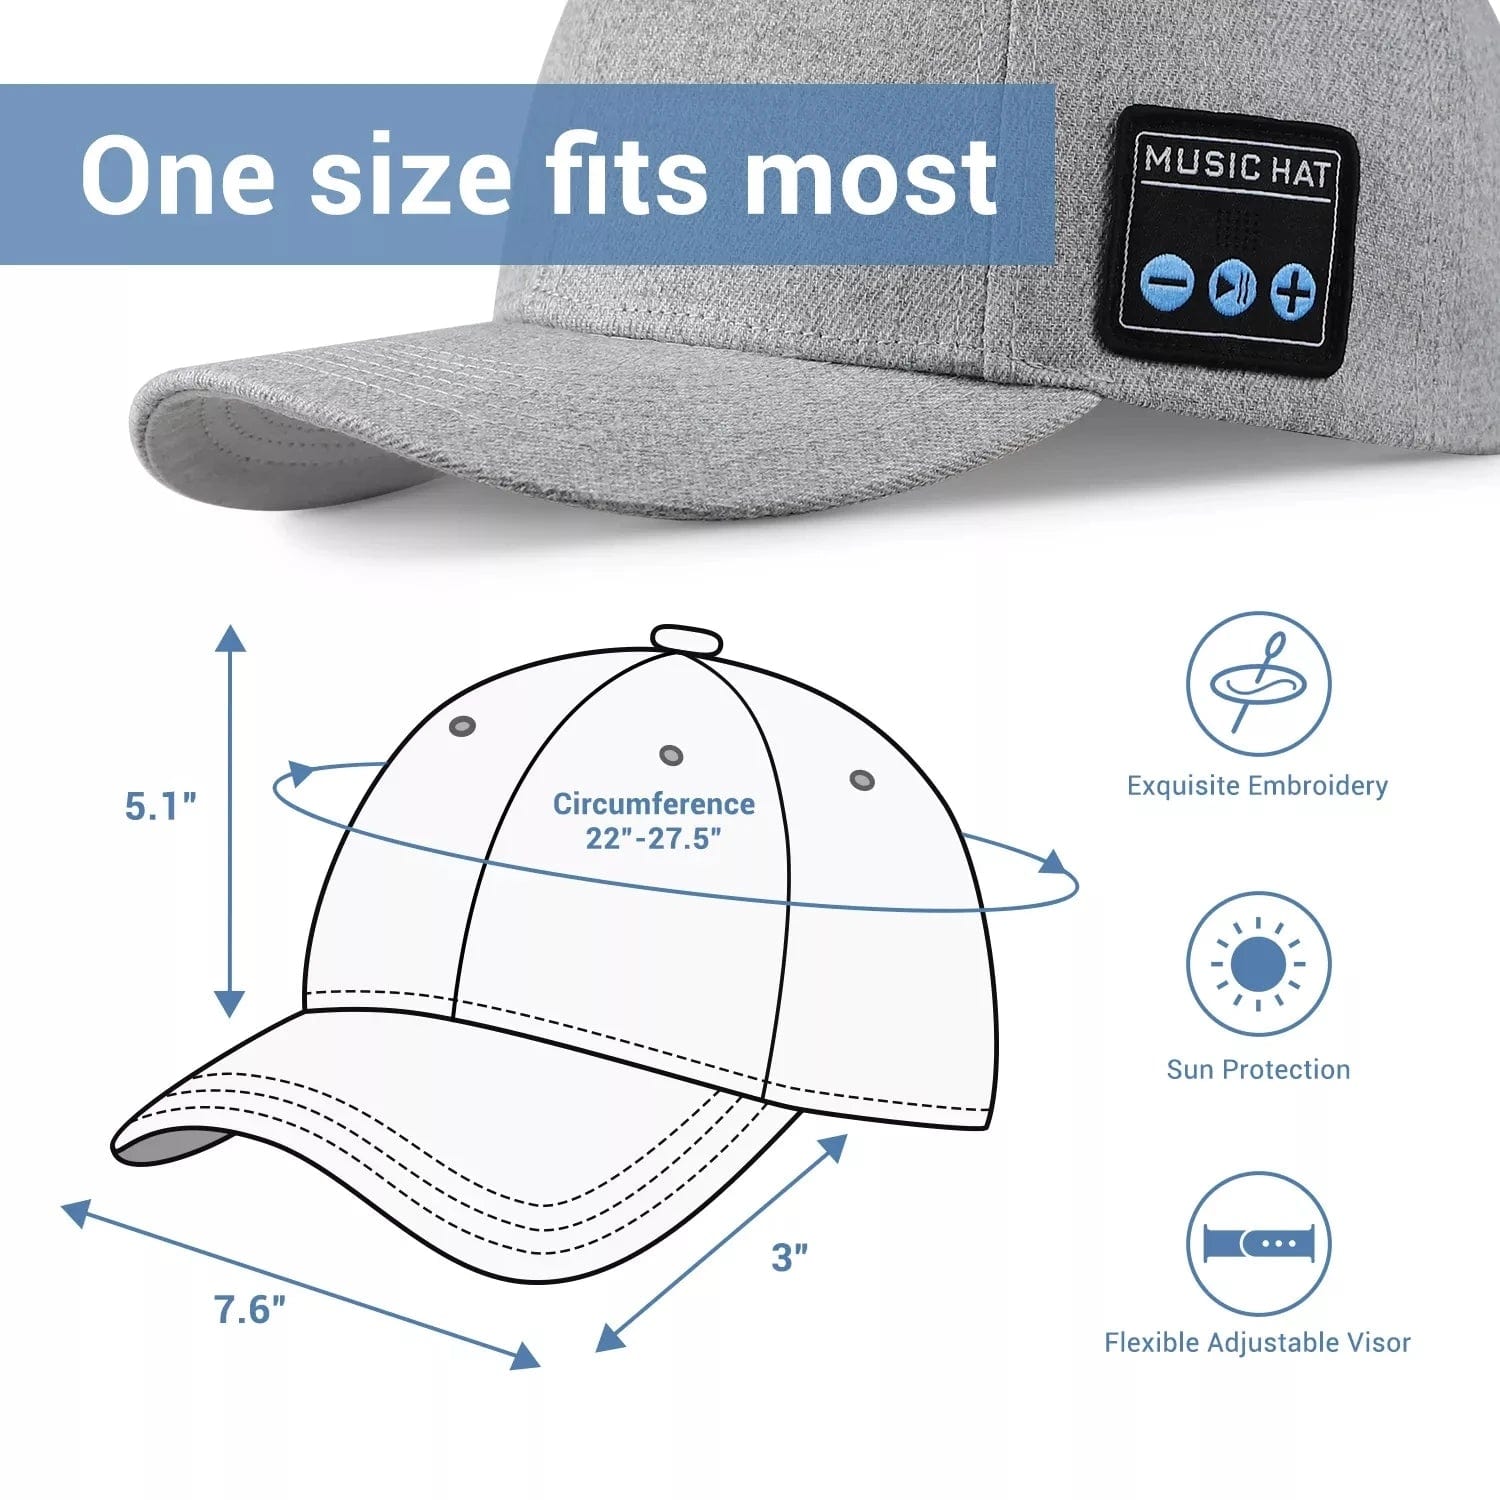 HomeBound Essentials Bluetooth Speaker Baseball Cap - Adjustable Hat with Mic for Wireless Music and Calls